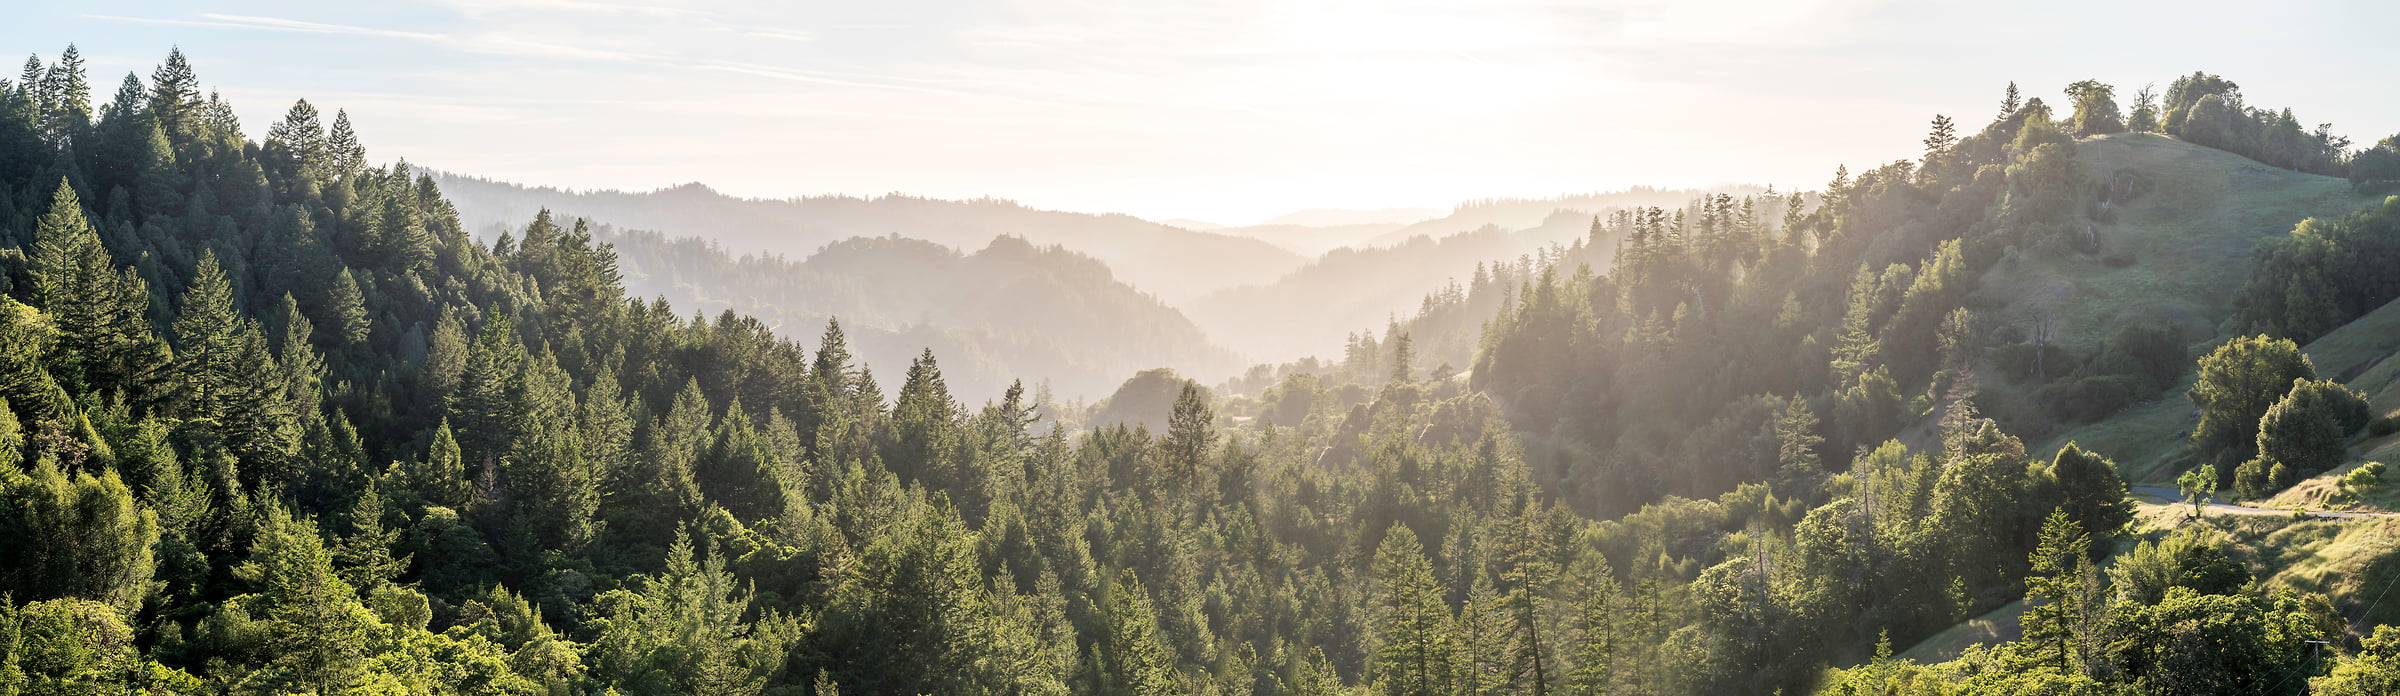 223 megapixels! A very high resolution, large-format VAST photo of the hills in California with forests; fine art landscape photo created by Justin Katz in Northern California.